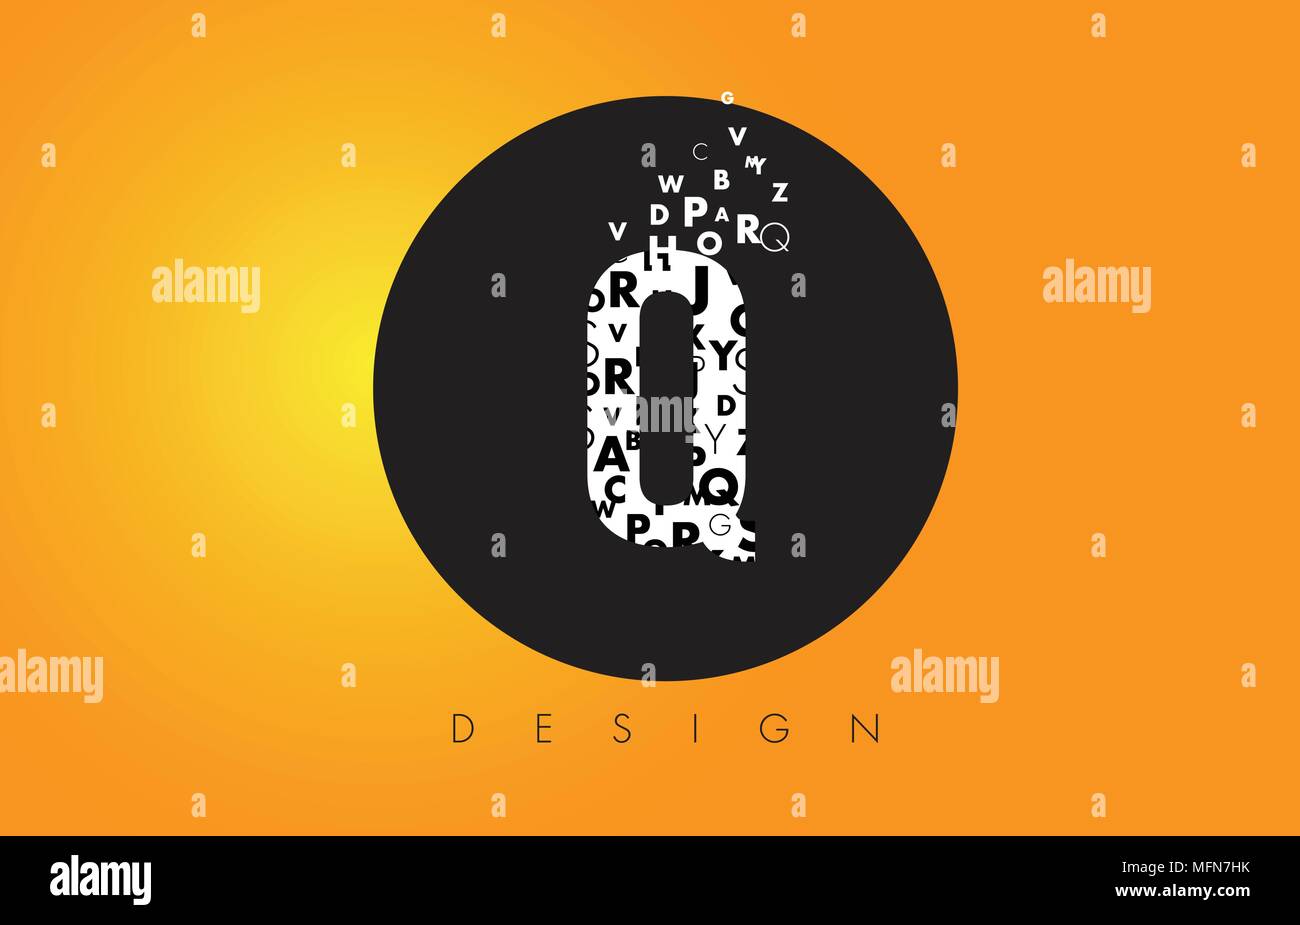 Q Logo Design Made of Small Letters with Black Circle and Yellow Background. Stock Vector